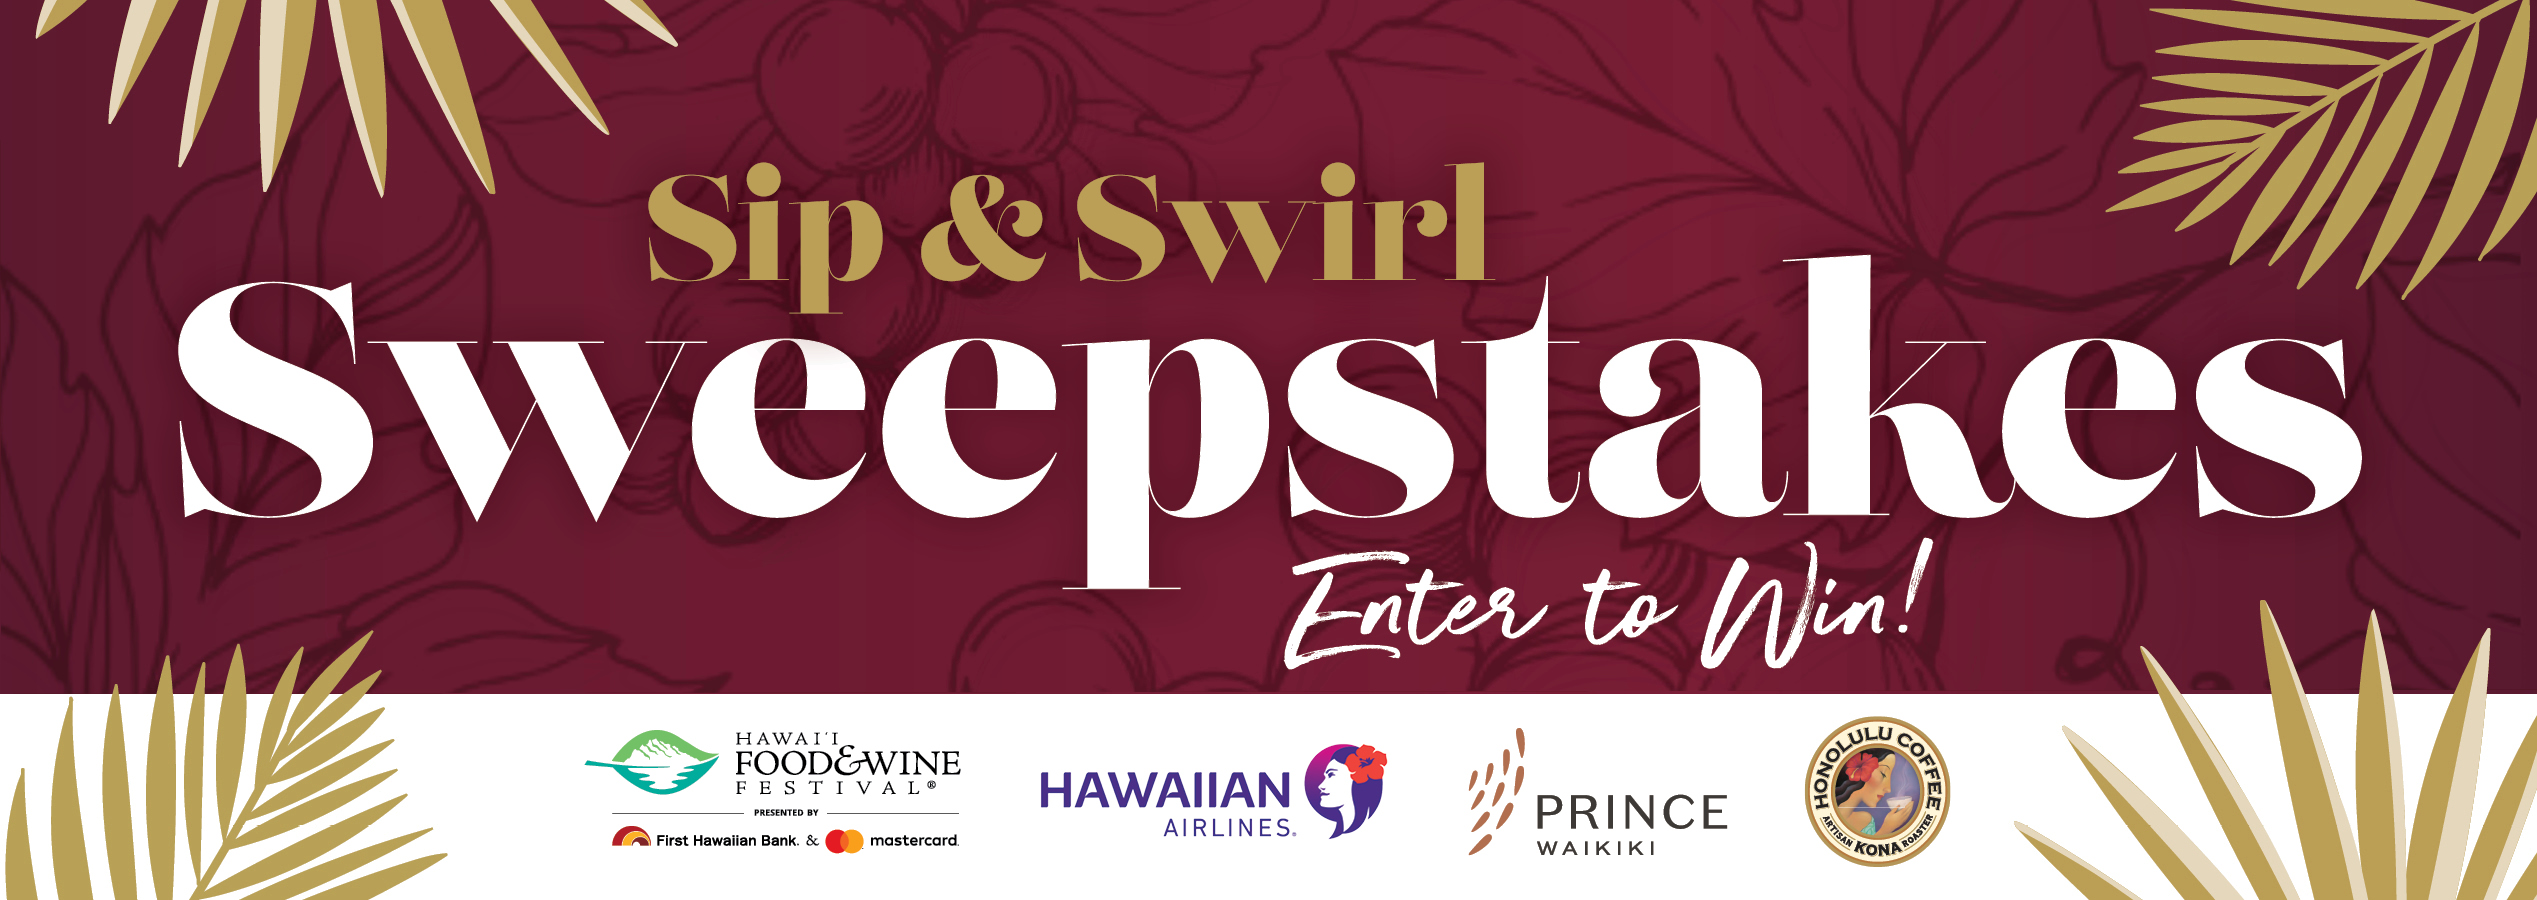 Sip & Swirl Sweepstakes Enter to Win